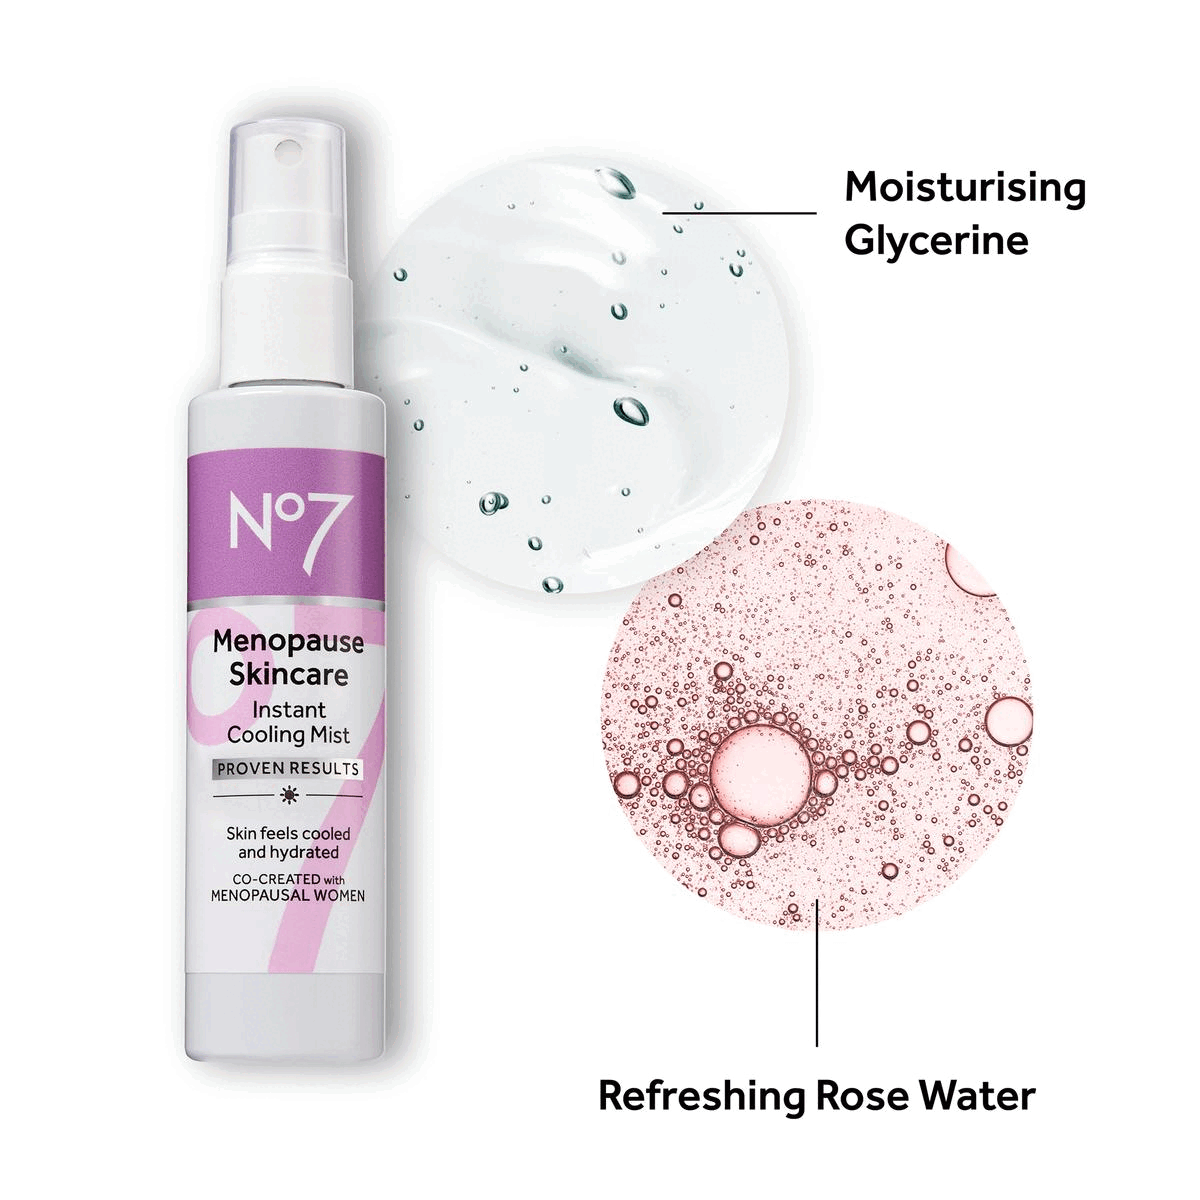 Mist, Moisturising glycerine and refreshing rose water.Brings cool and calm to hot, flushed skin* Consumer study